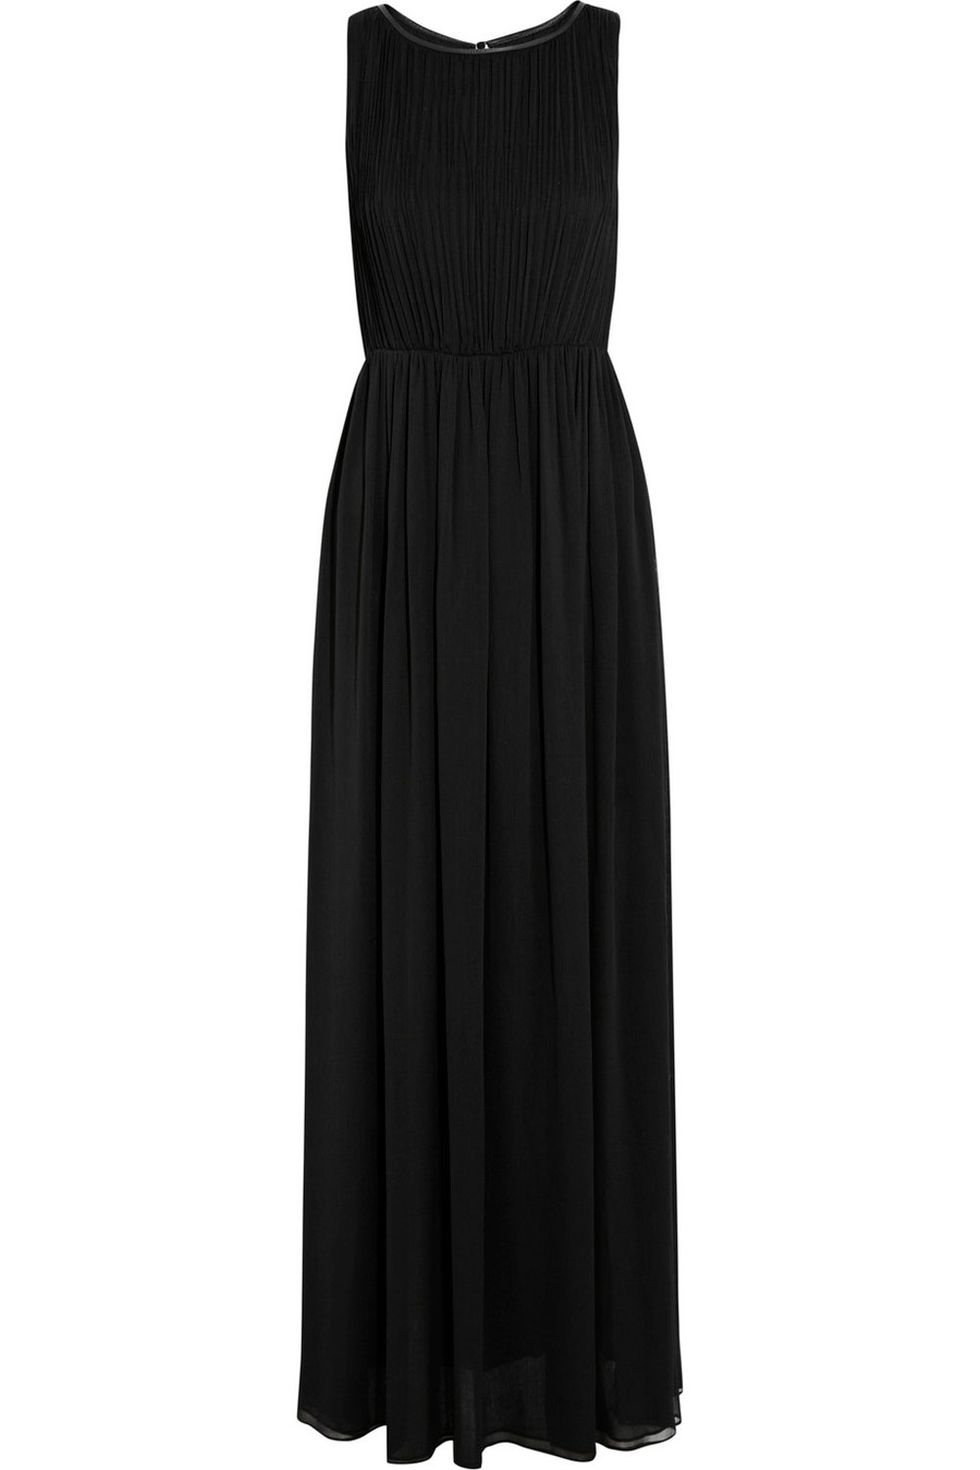 <p>A special occasion like one of your bessies tying the knot calls for something that little bit extra. Splash out on <a href="http://www.theoutnet.com/en-GB/product/Alice-and-Olivia/Jaydn-leather-trimmed-crinkled-chiffon-maxi-dress/449968" target="_blank">this Alice and Olivia dress</a> and you'll be able to wear it over and over again.</p>
<p><a href="http://www.cosmopolitan.co.uk/fashion/celebrity/celebrity-maternity-style-inspiration" target="_blank">MORE A-LIST INSPIRATION: HOW TO STYLE MATERNITY WEAR</a></p>
<p><a href="http://www.cosmopolitan.co.uk/fashion/shopping/embellished-phone-cases" target="_blank">THE BEST IPHONE CASES FOR YOUR HANDBAG</a></p>